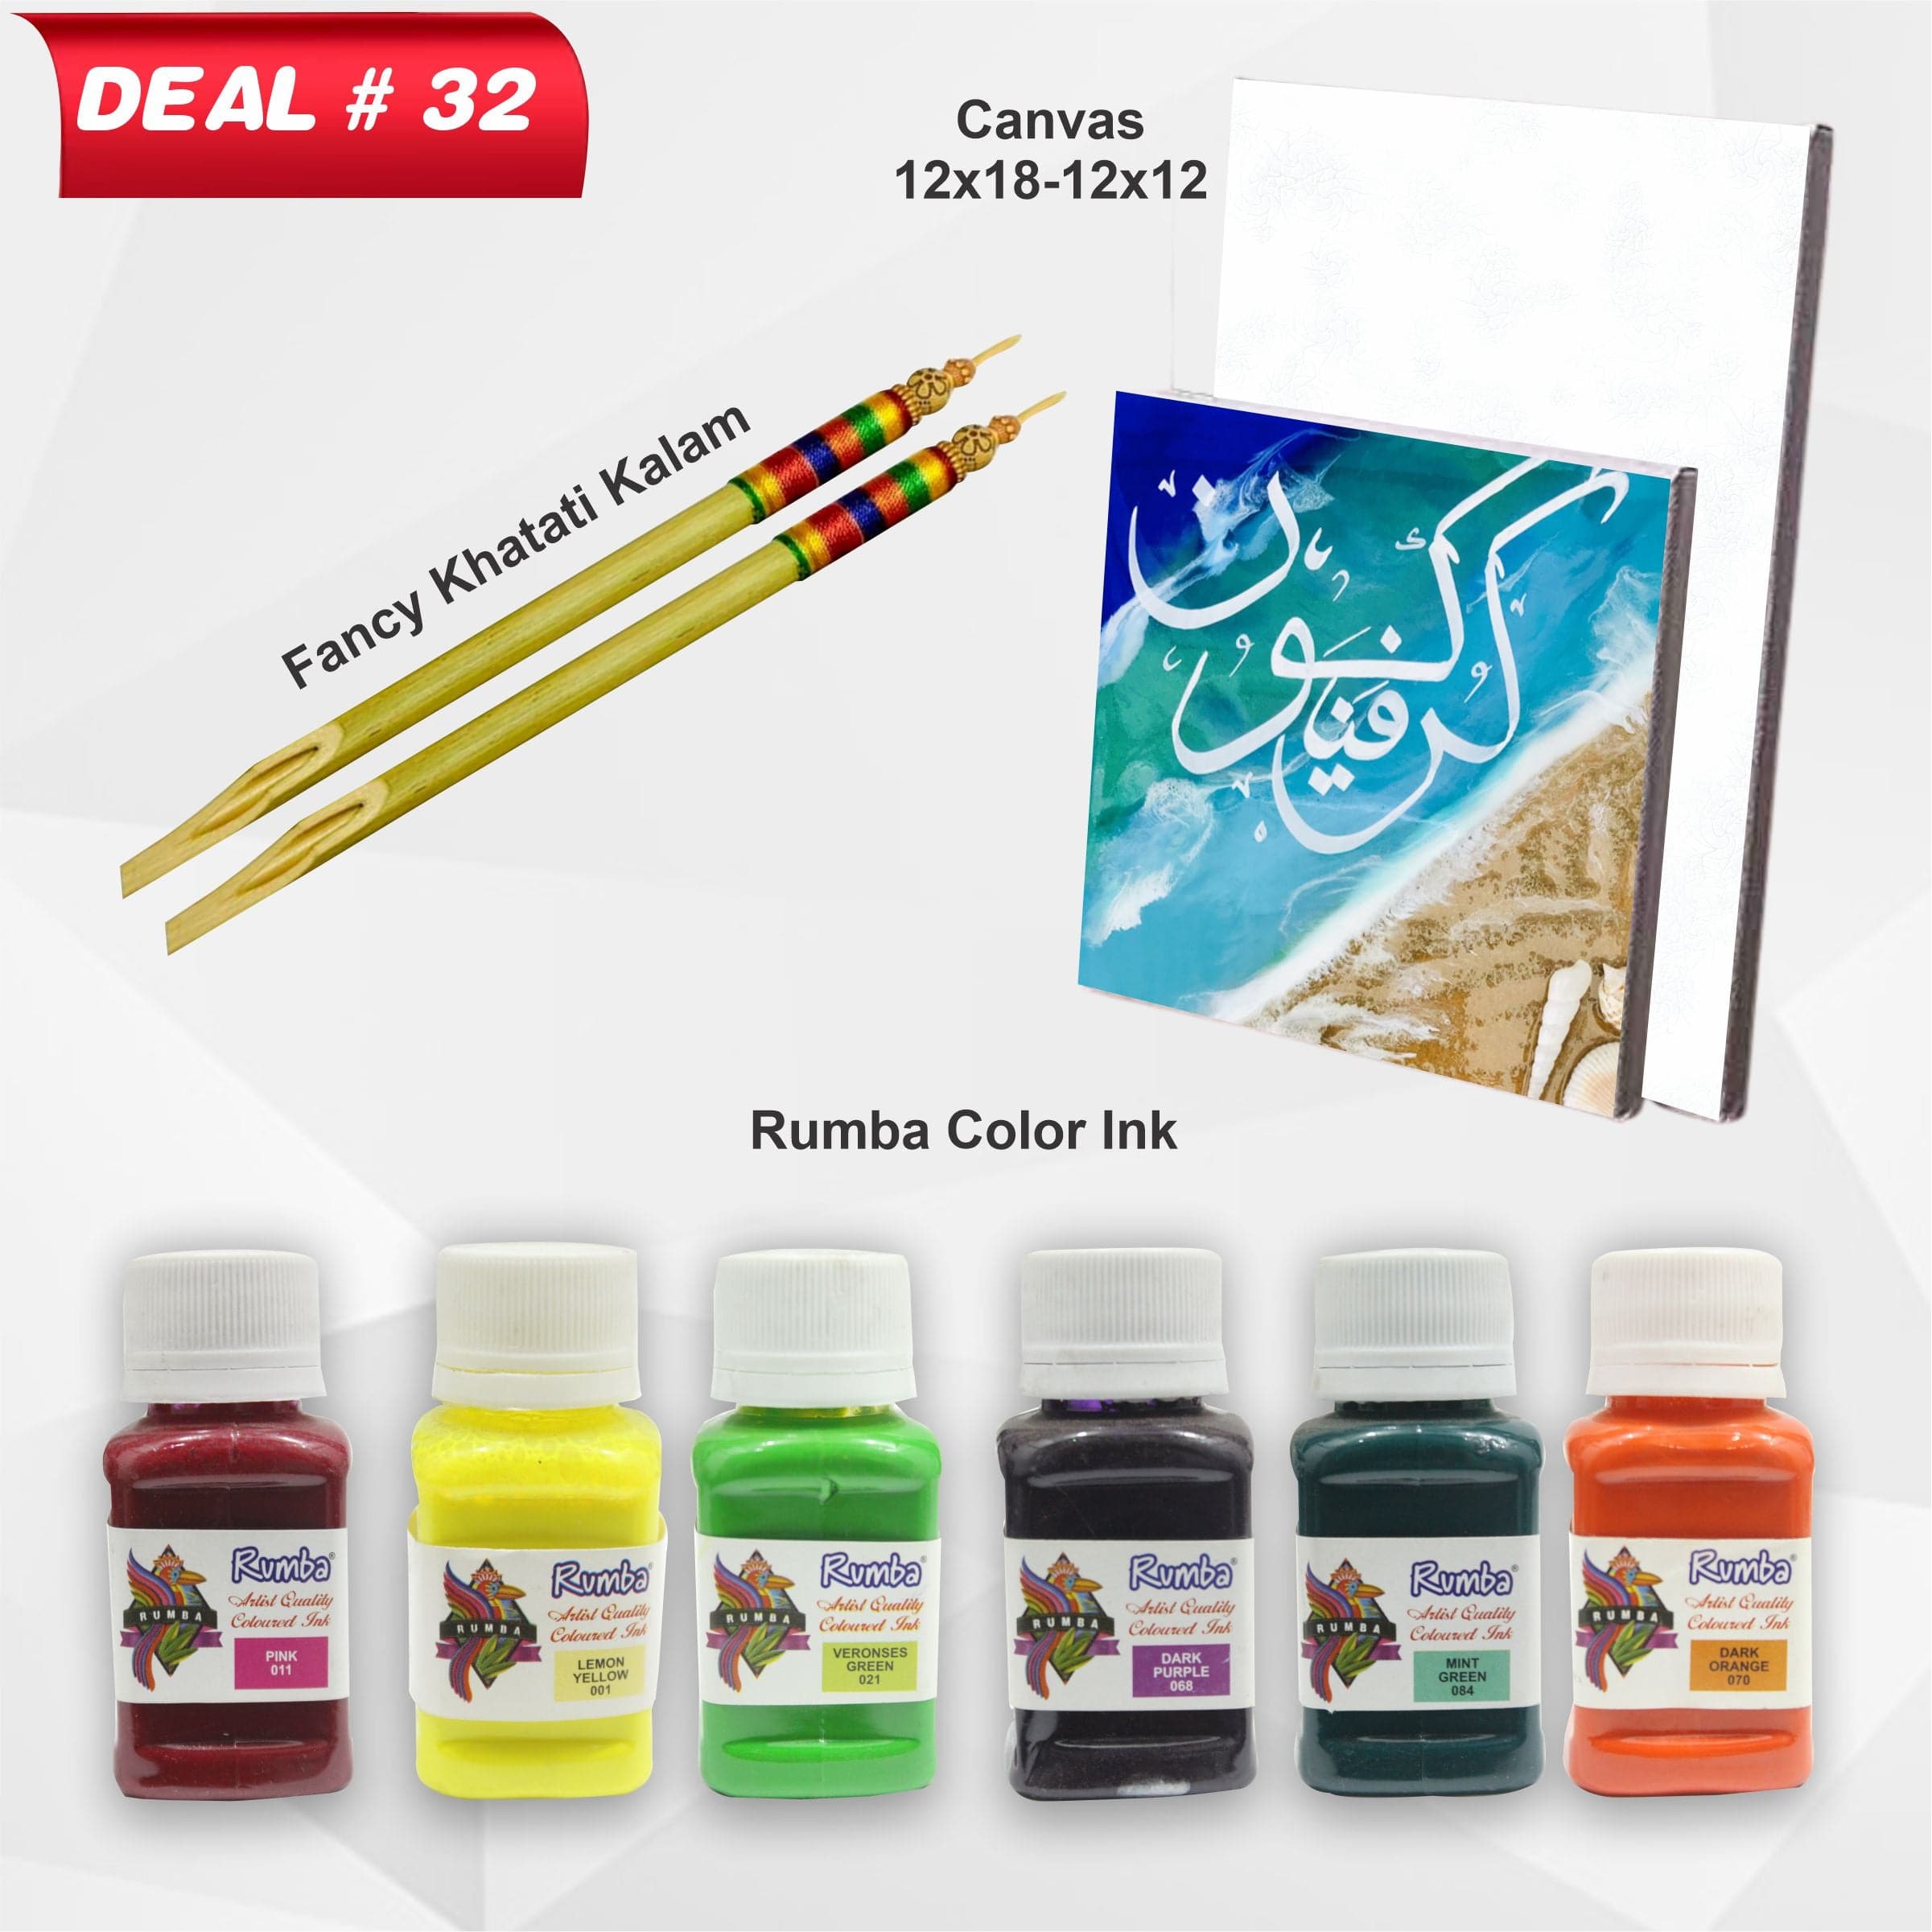 Professional Artist Calligraphy Deal No. 32